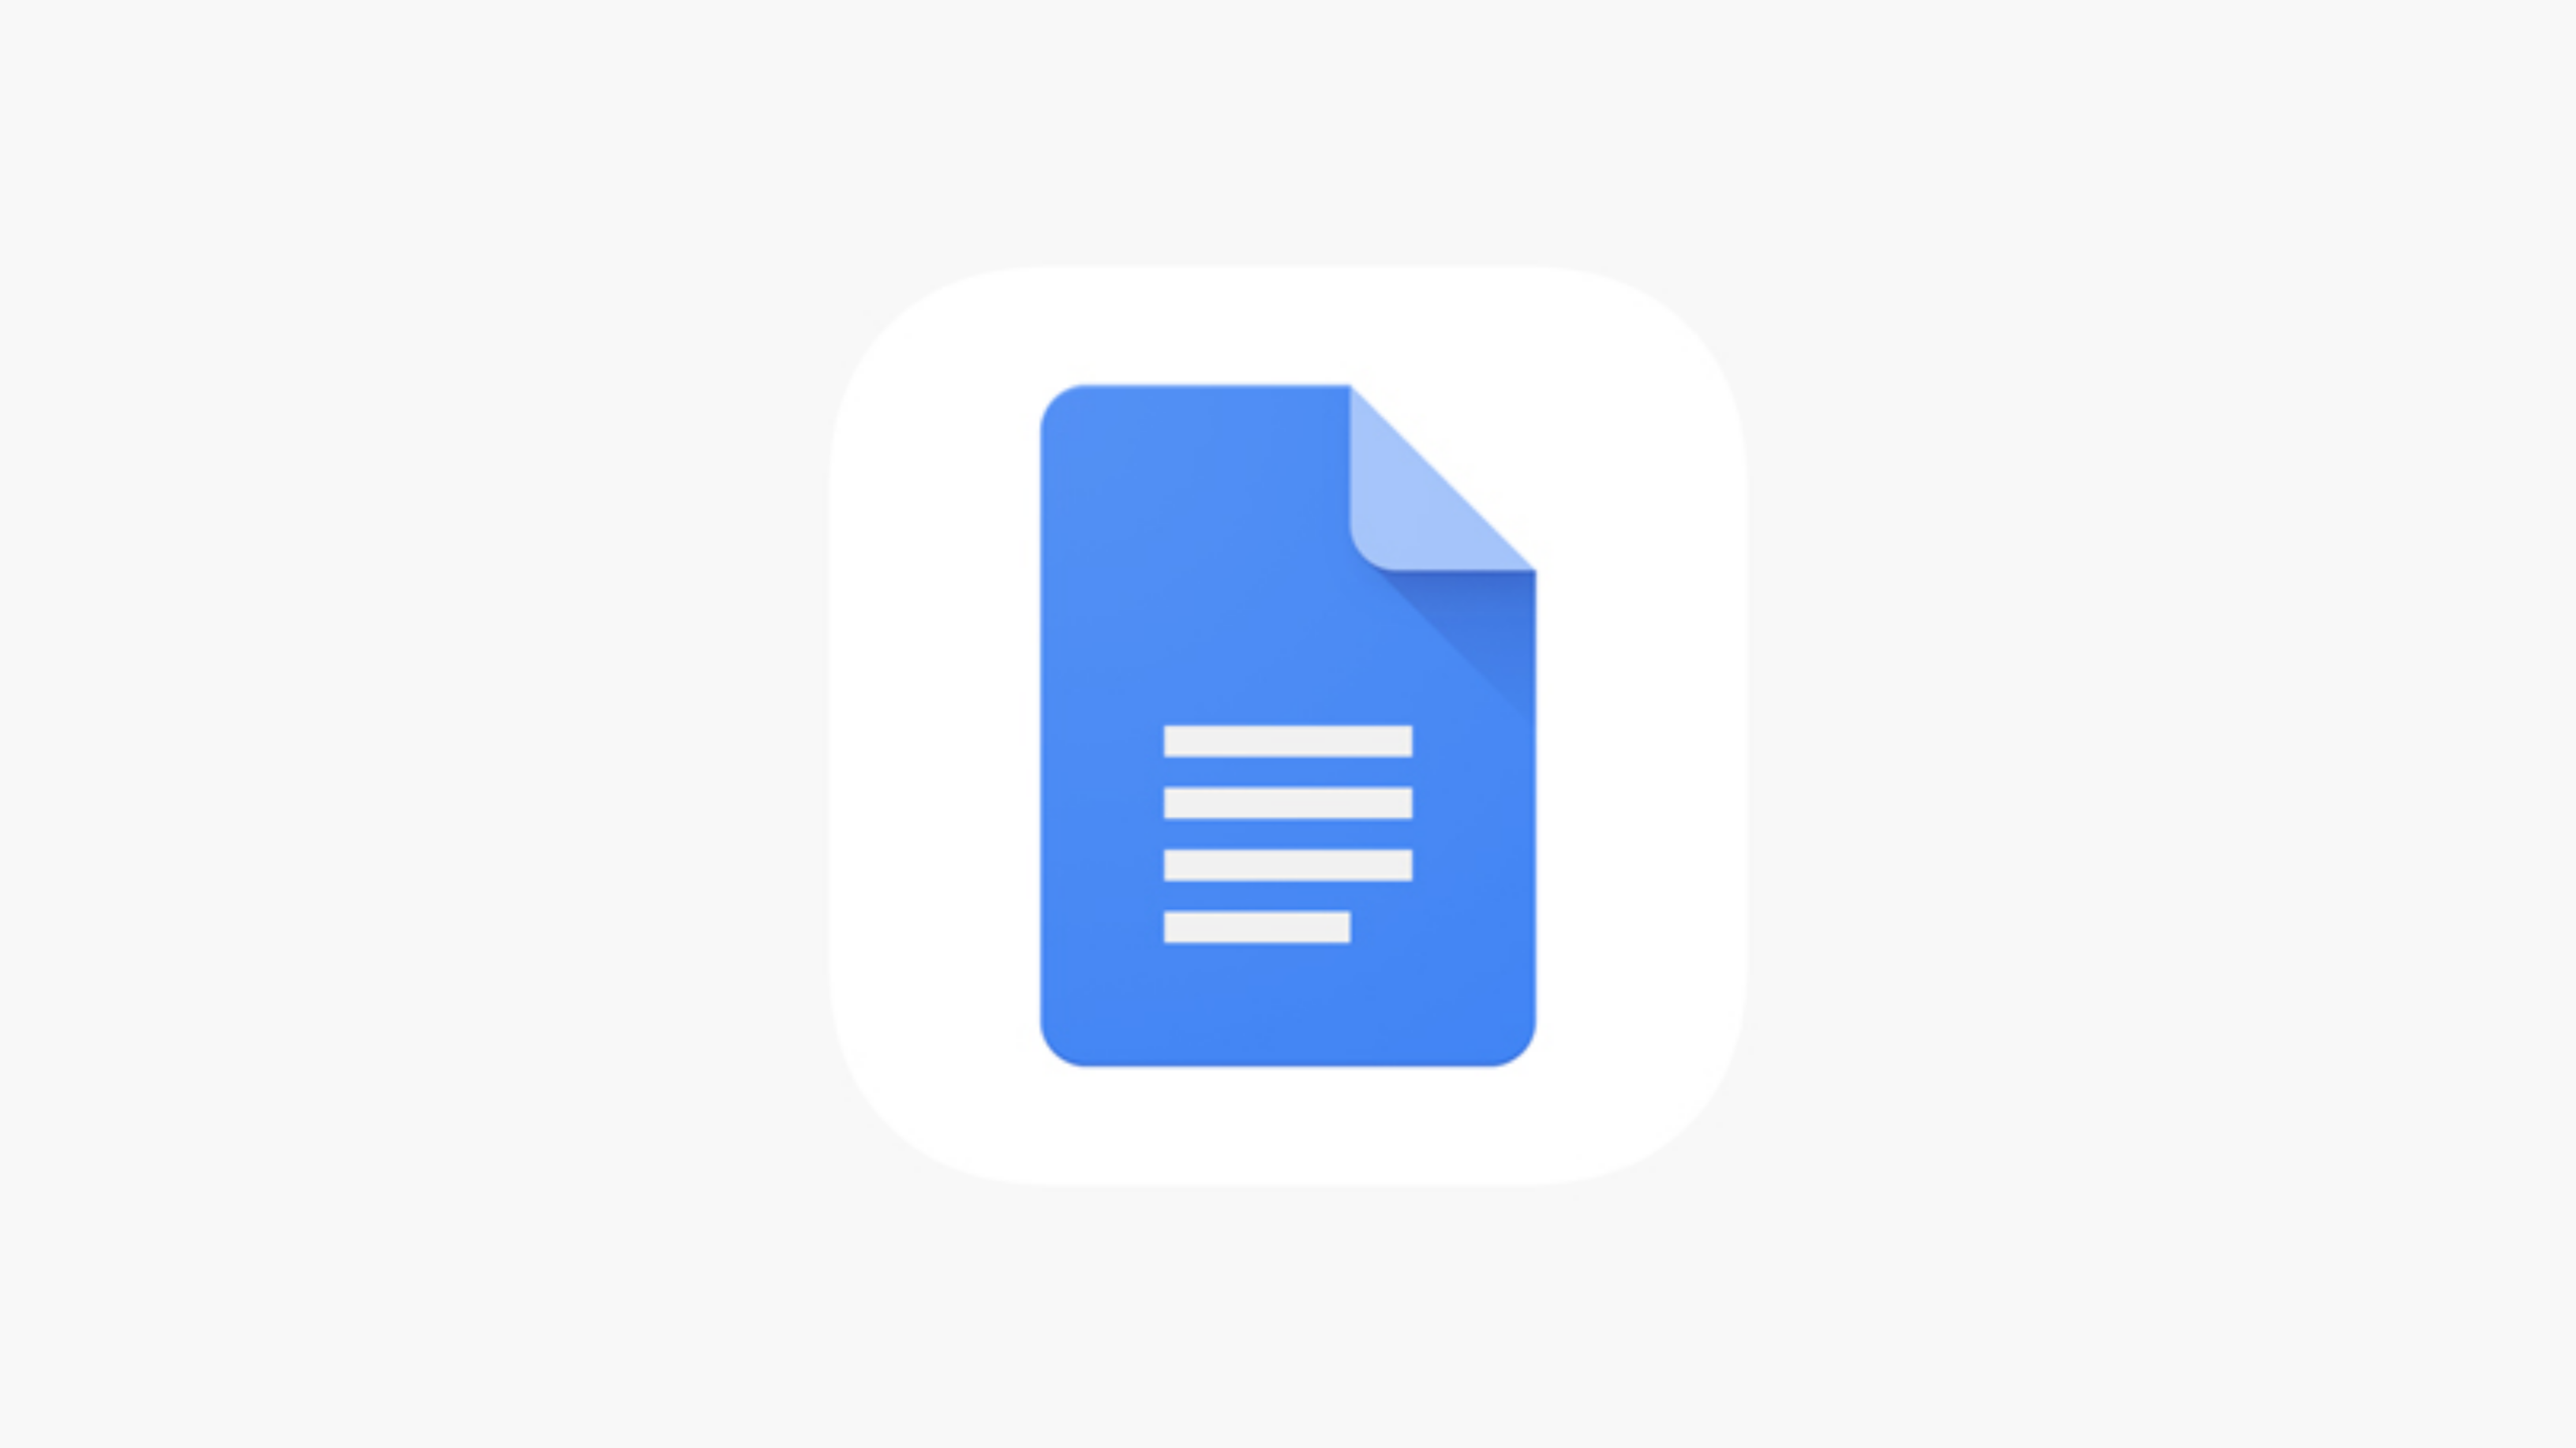 A Handwritten Feature is Coming to Google Docs